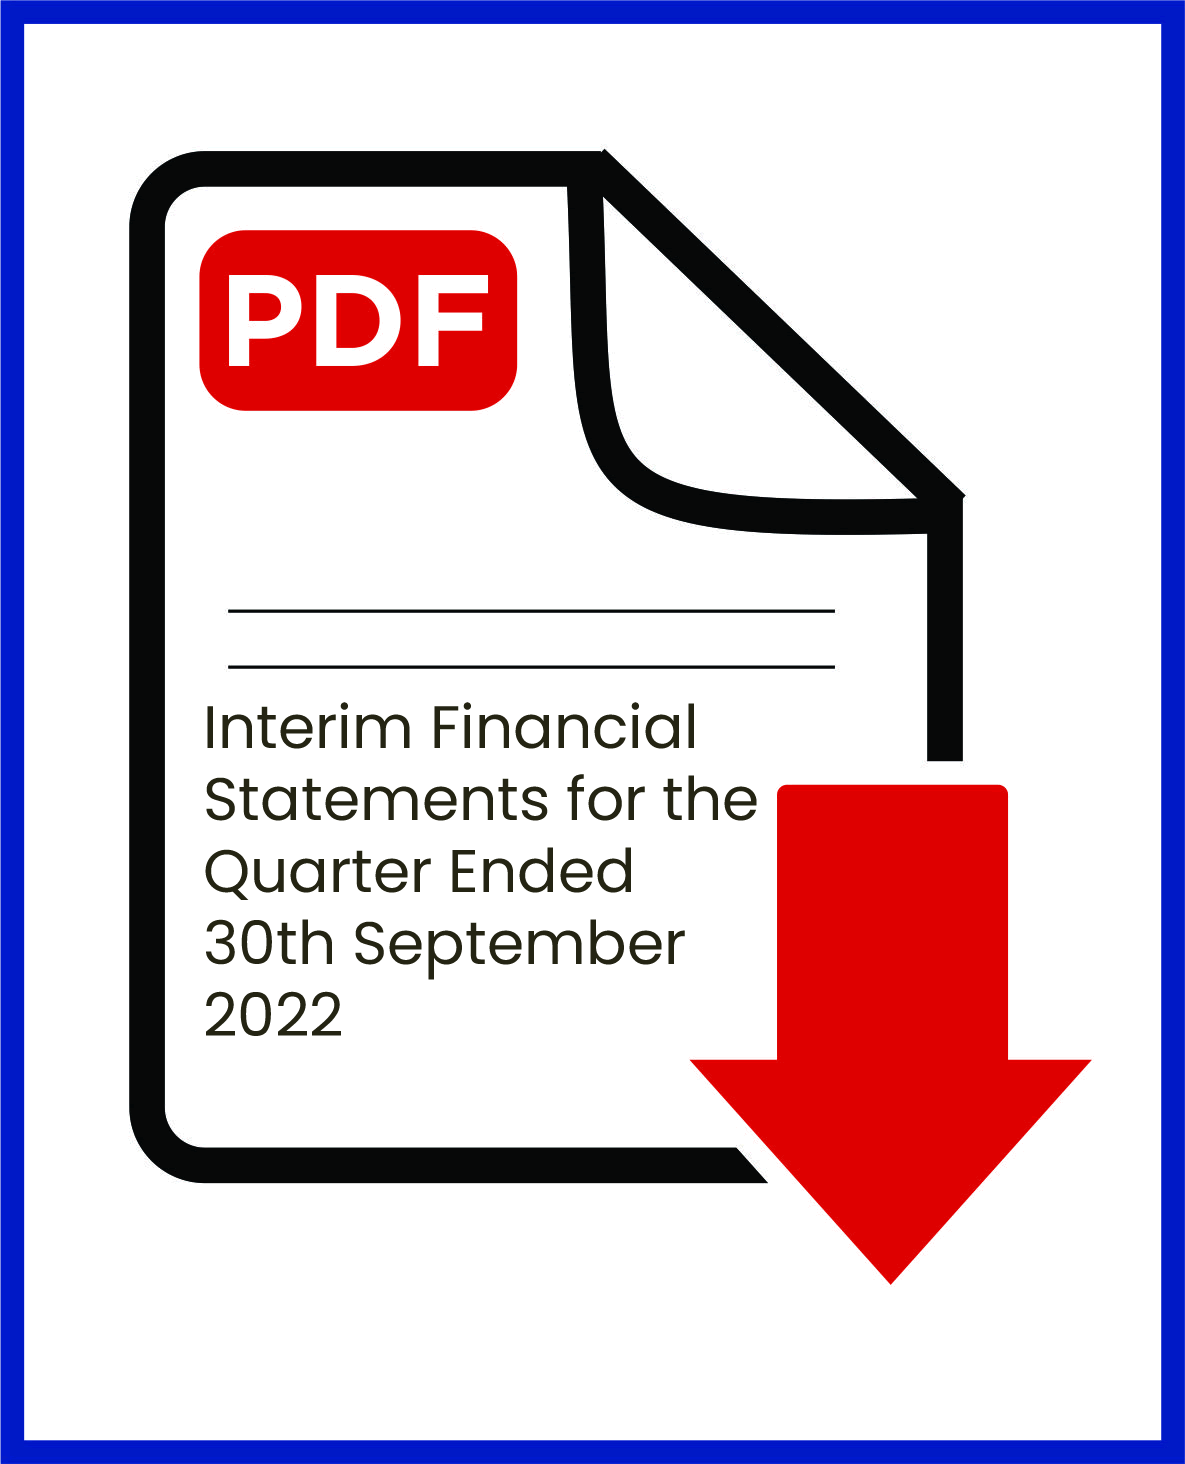 Interim Financial Statements For the Quarter Ended 30th September 2022